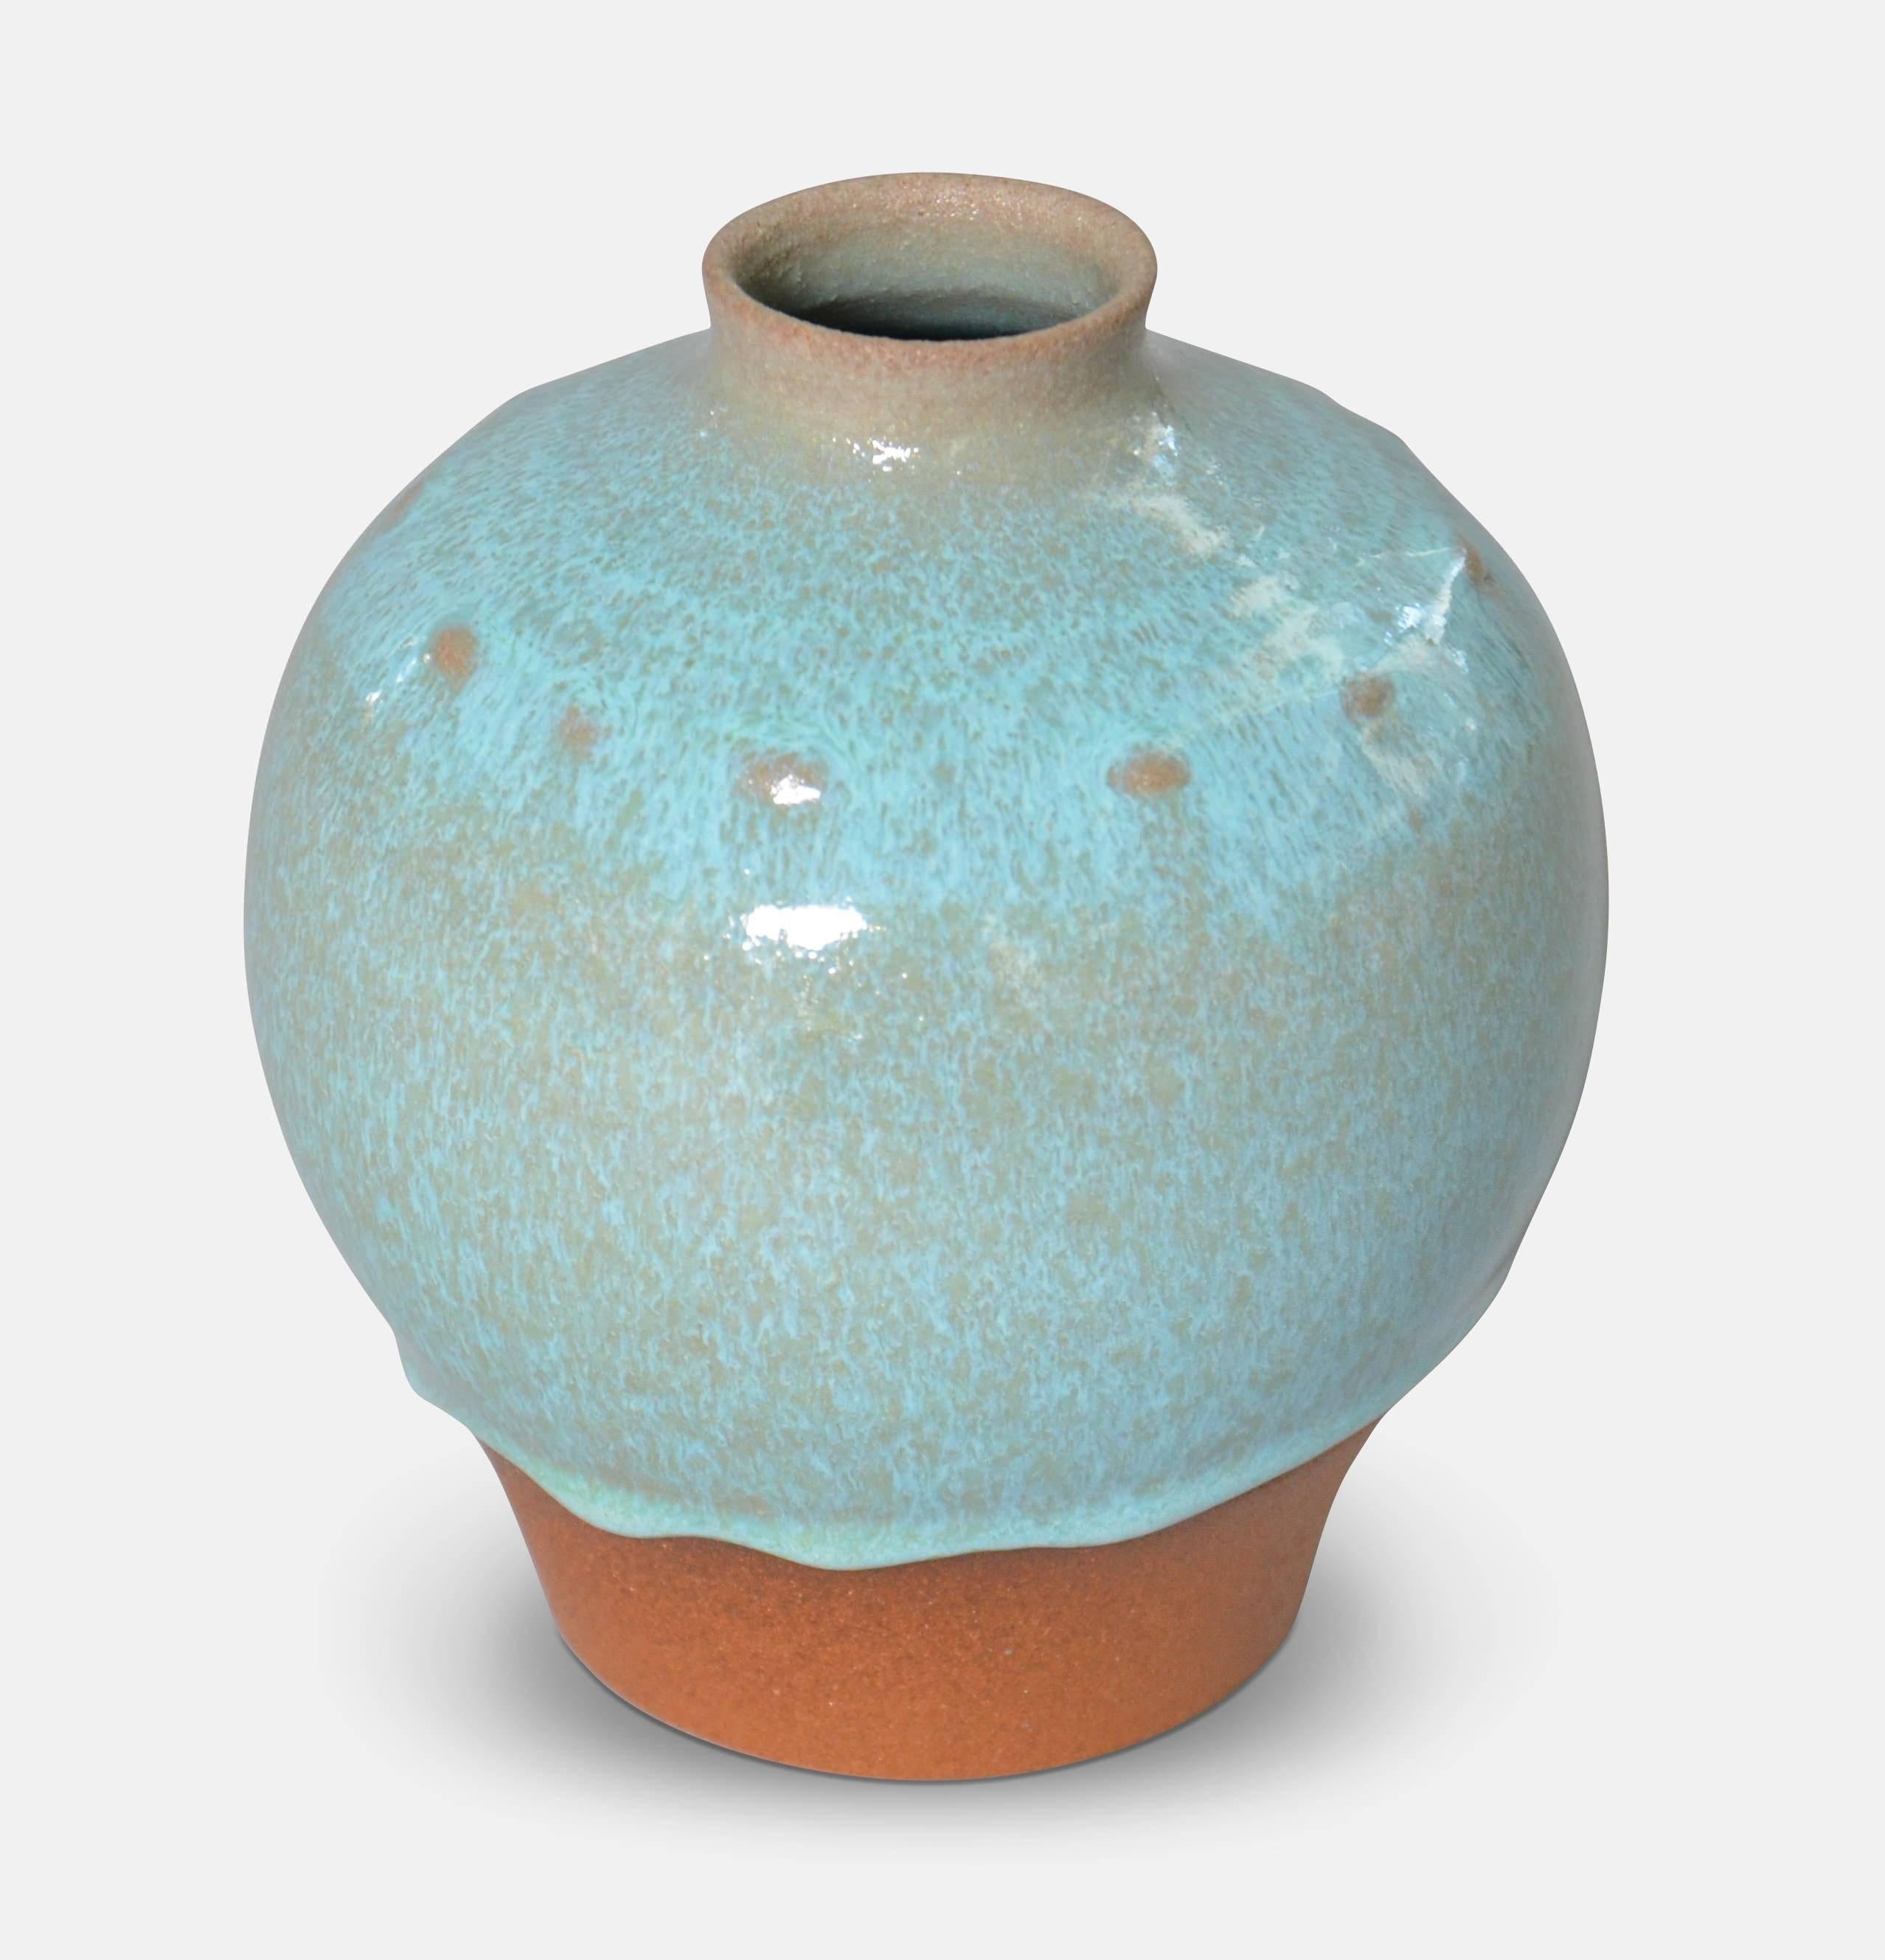 Christian Poulsen (1911-1991).
Round vase with dots and running blue glaze. 
Signed 